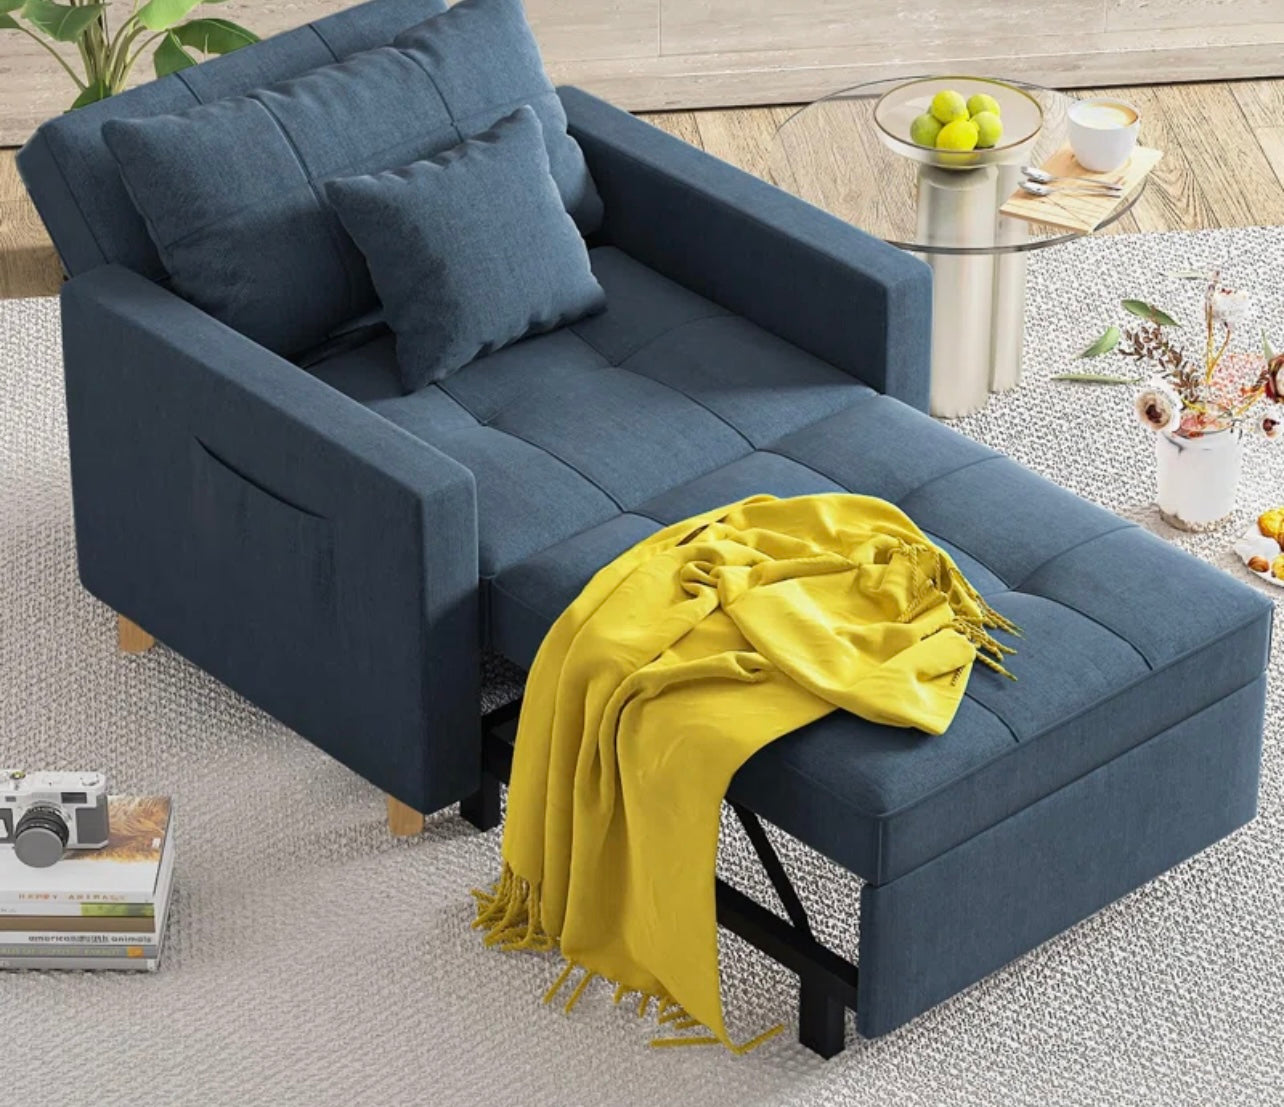 Comfortable 1 Seater Foldout Upholstered Sofa Bed